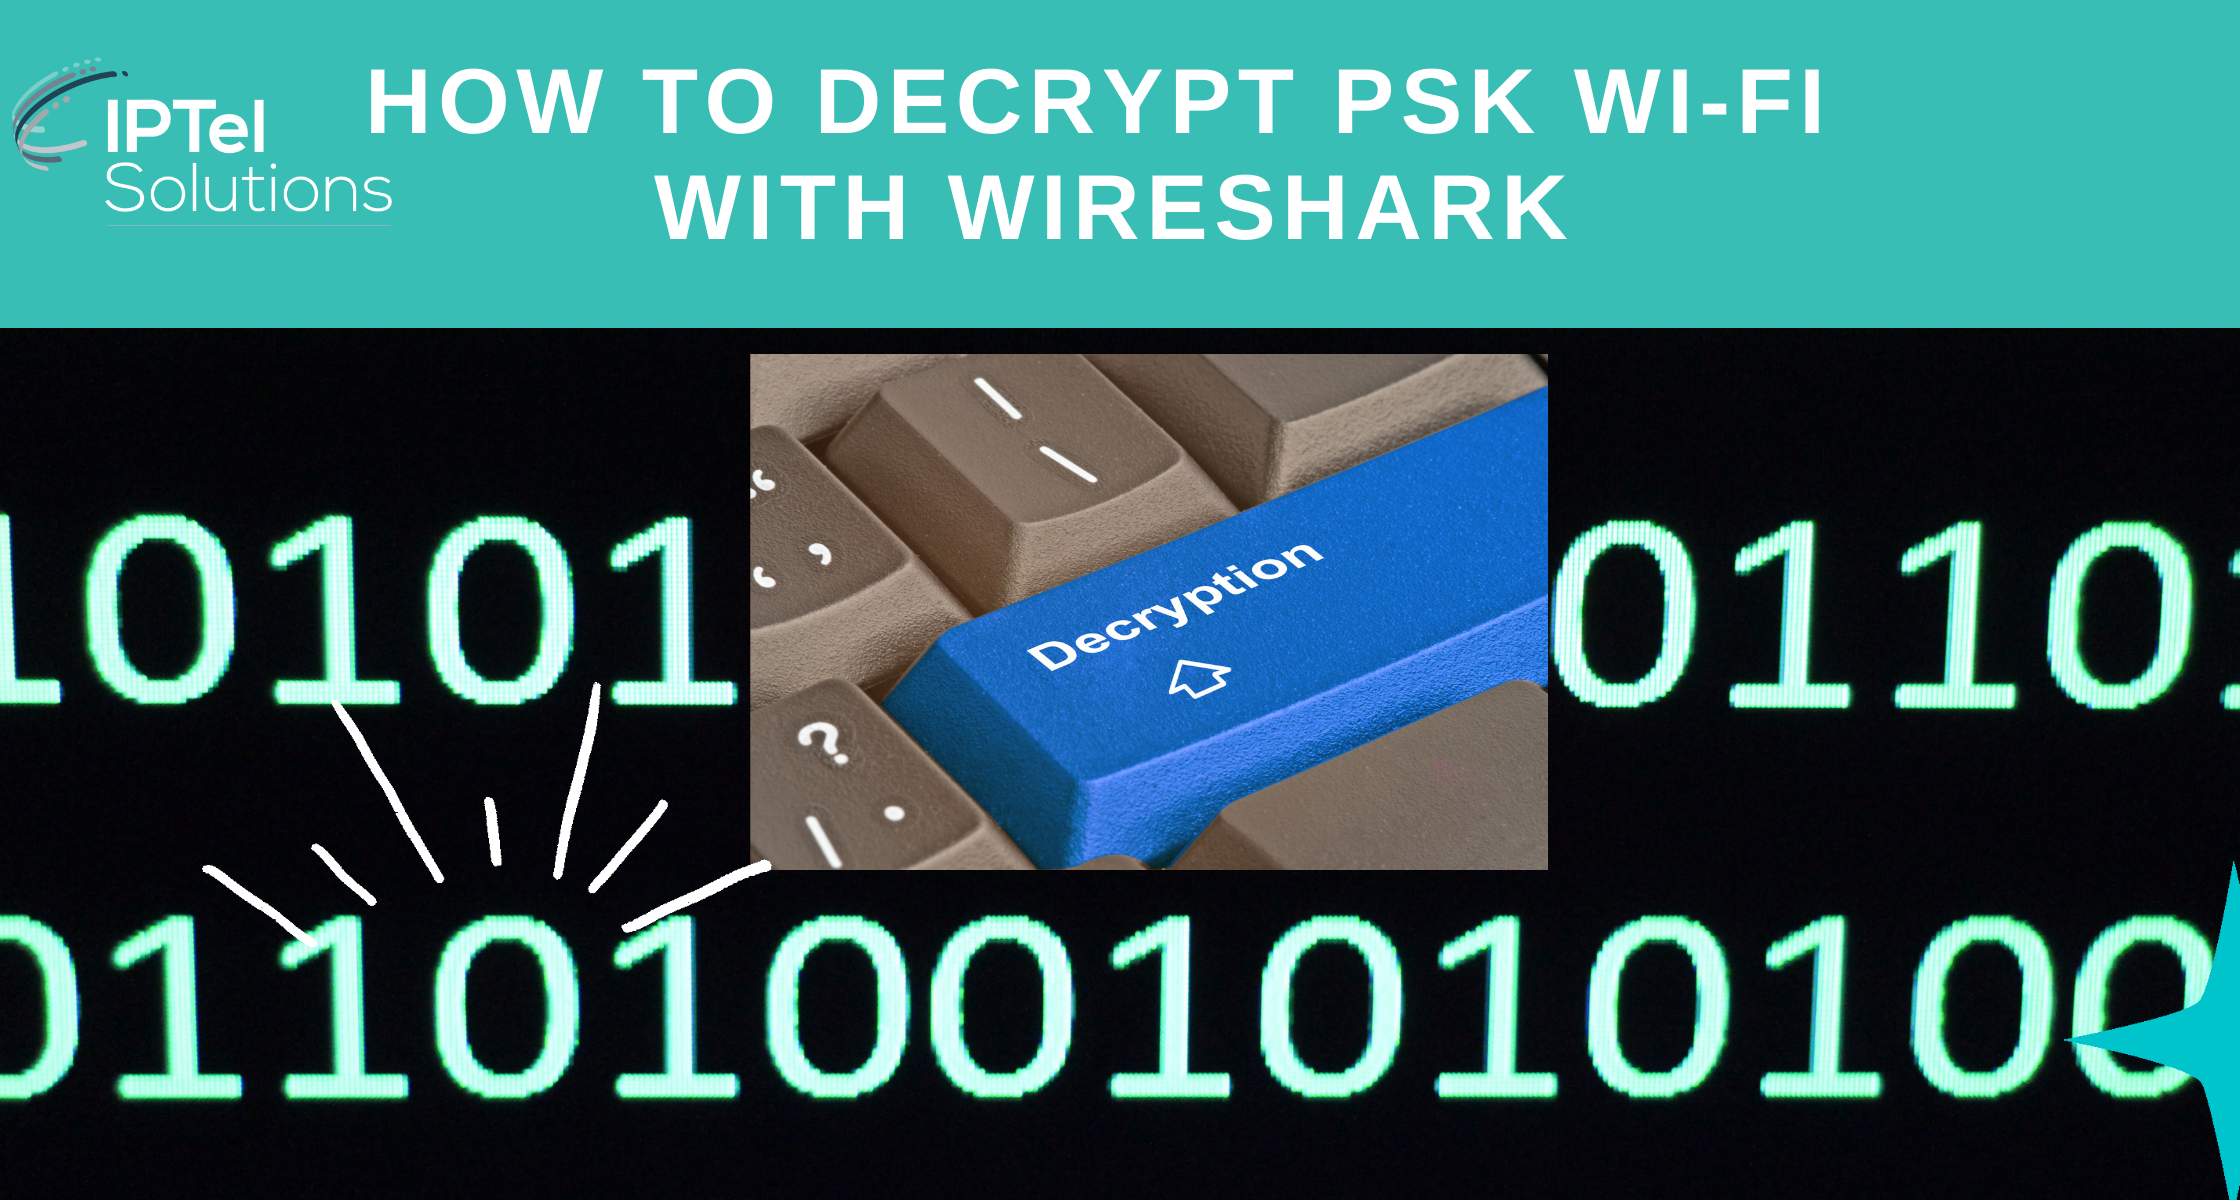 How to decrypt Psk Wi-fi with Wireshark